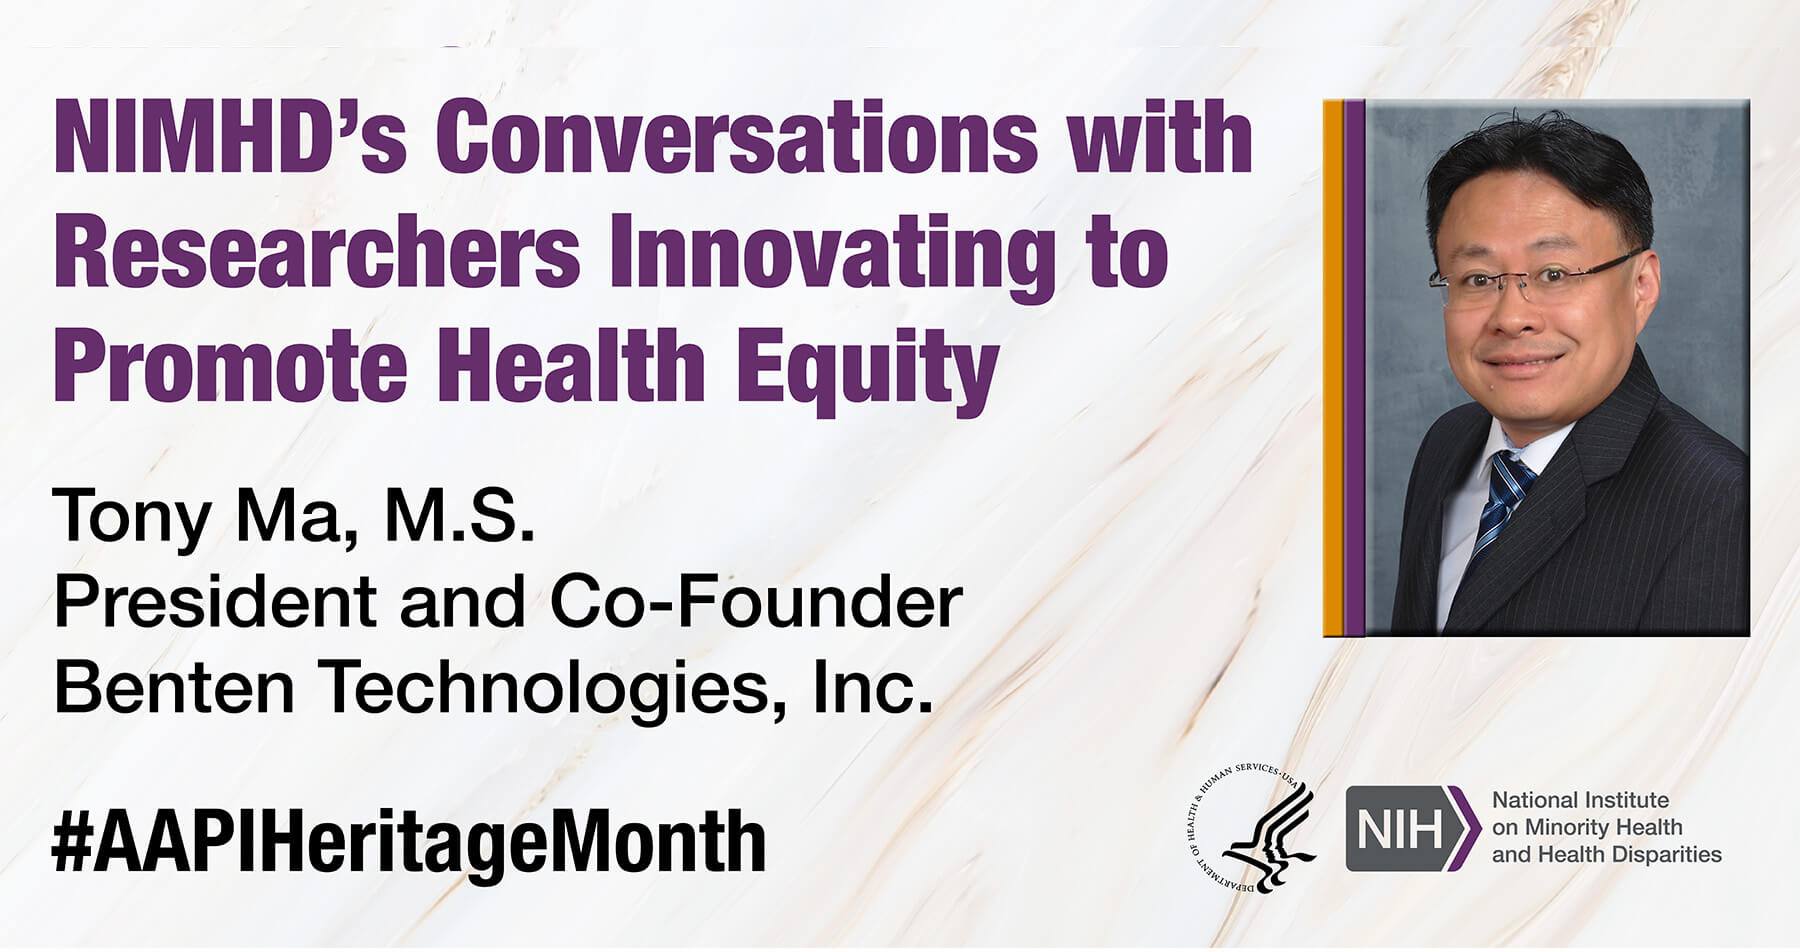 NIMHD's Conversations with Researchers Innovating to Promote Health Equity for AANHPI Heritage Month: Tony Ma, M.S.